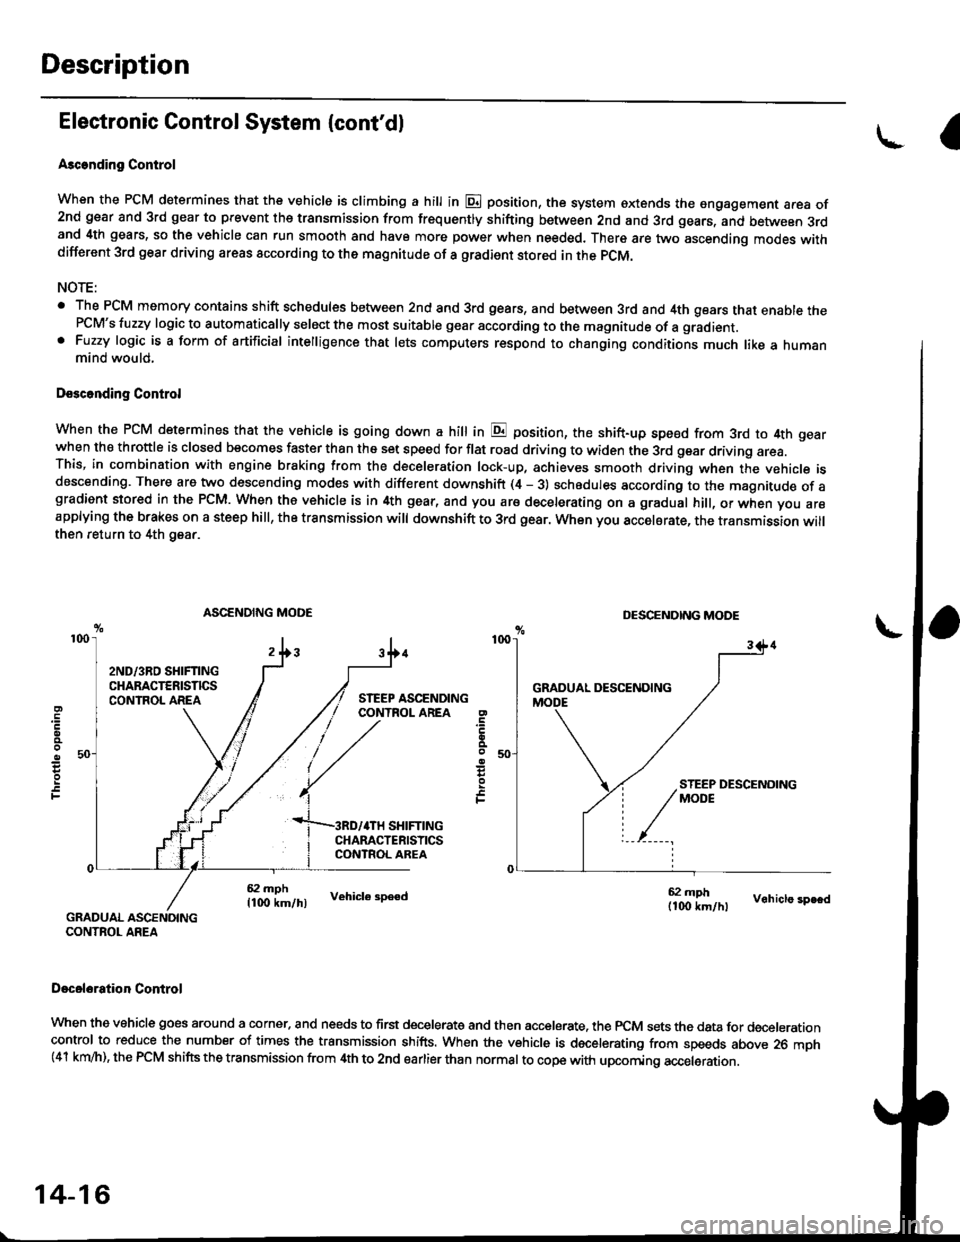 HONDA CIVIC 1996 6.G Workshop Manual Description
Electronic Control System {contdl
Ascending Control
When the PCM determines that the vehicle is climbing a hill in E position, the system oxtends the sngagement area of2nd gear and 3rd ge